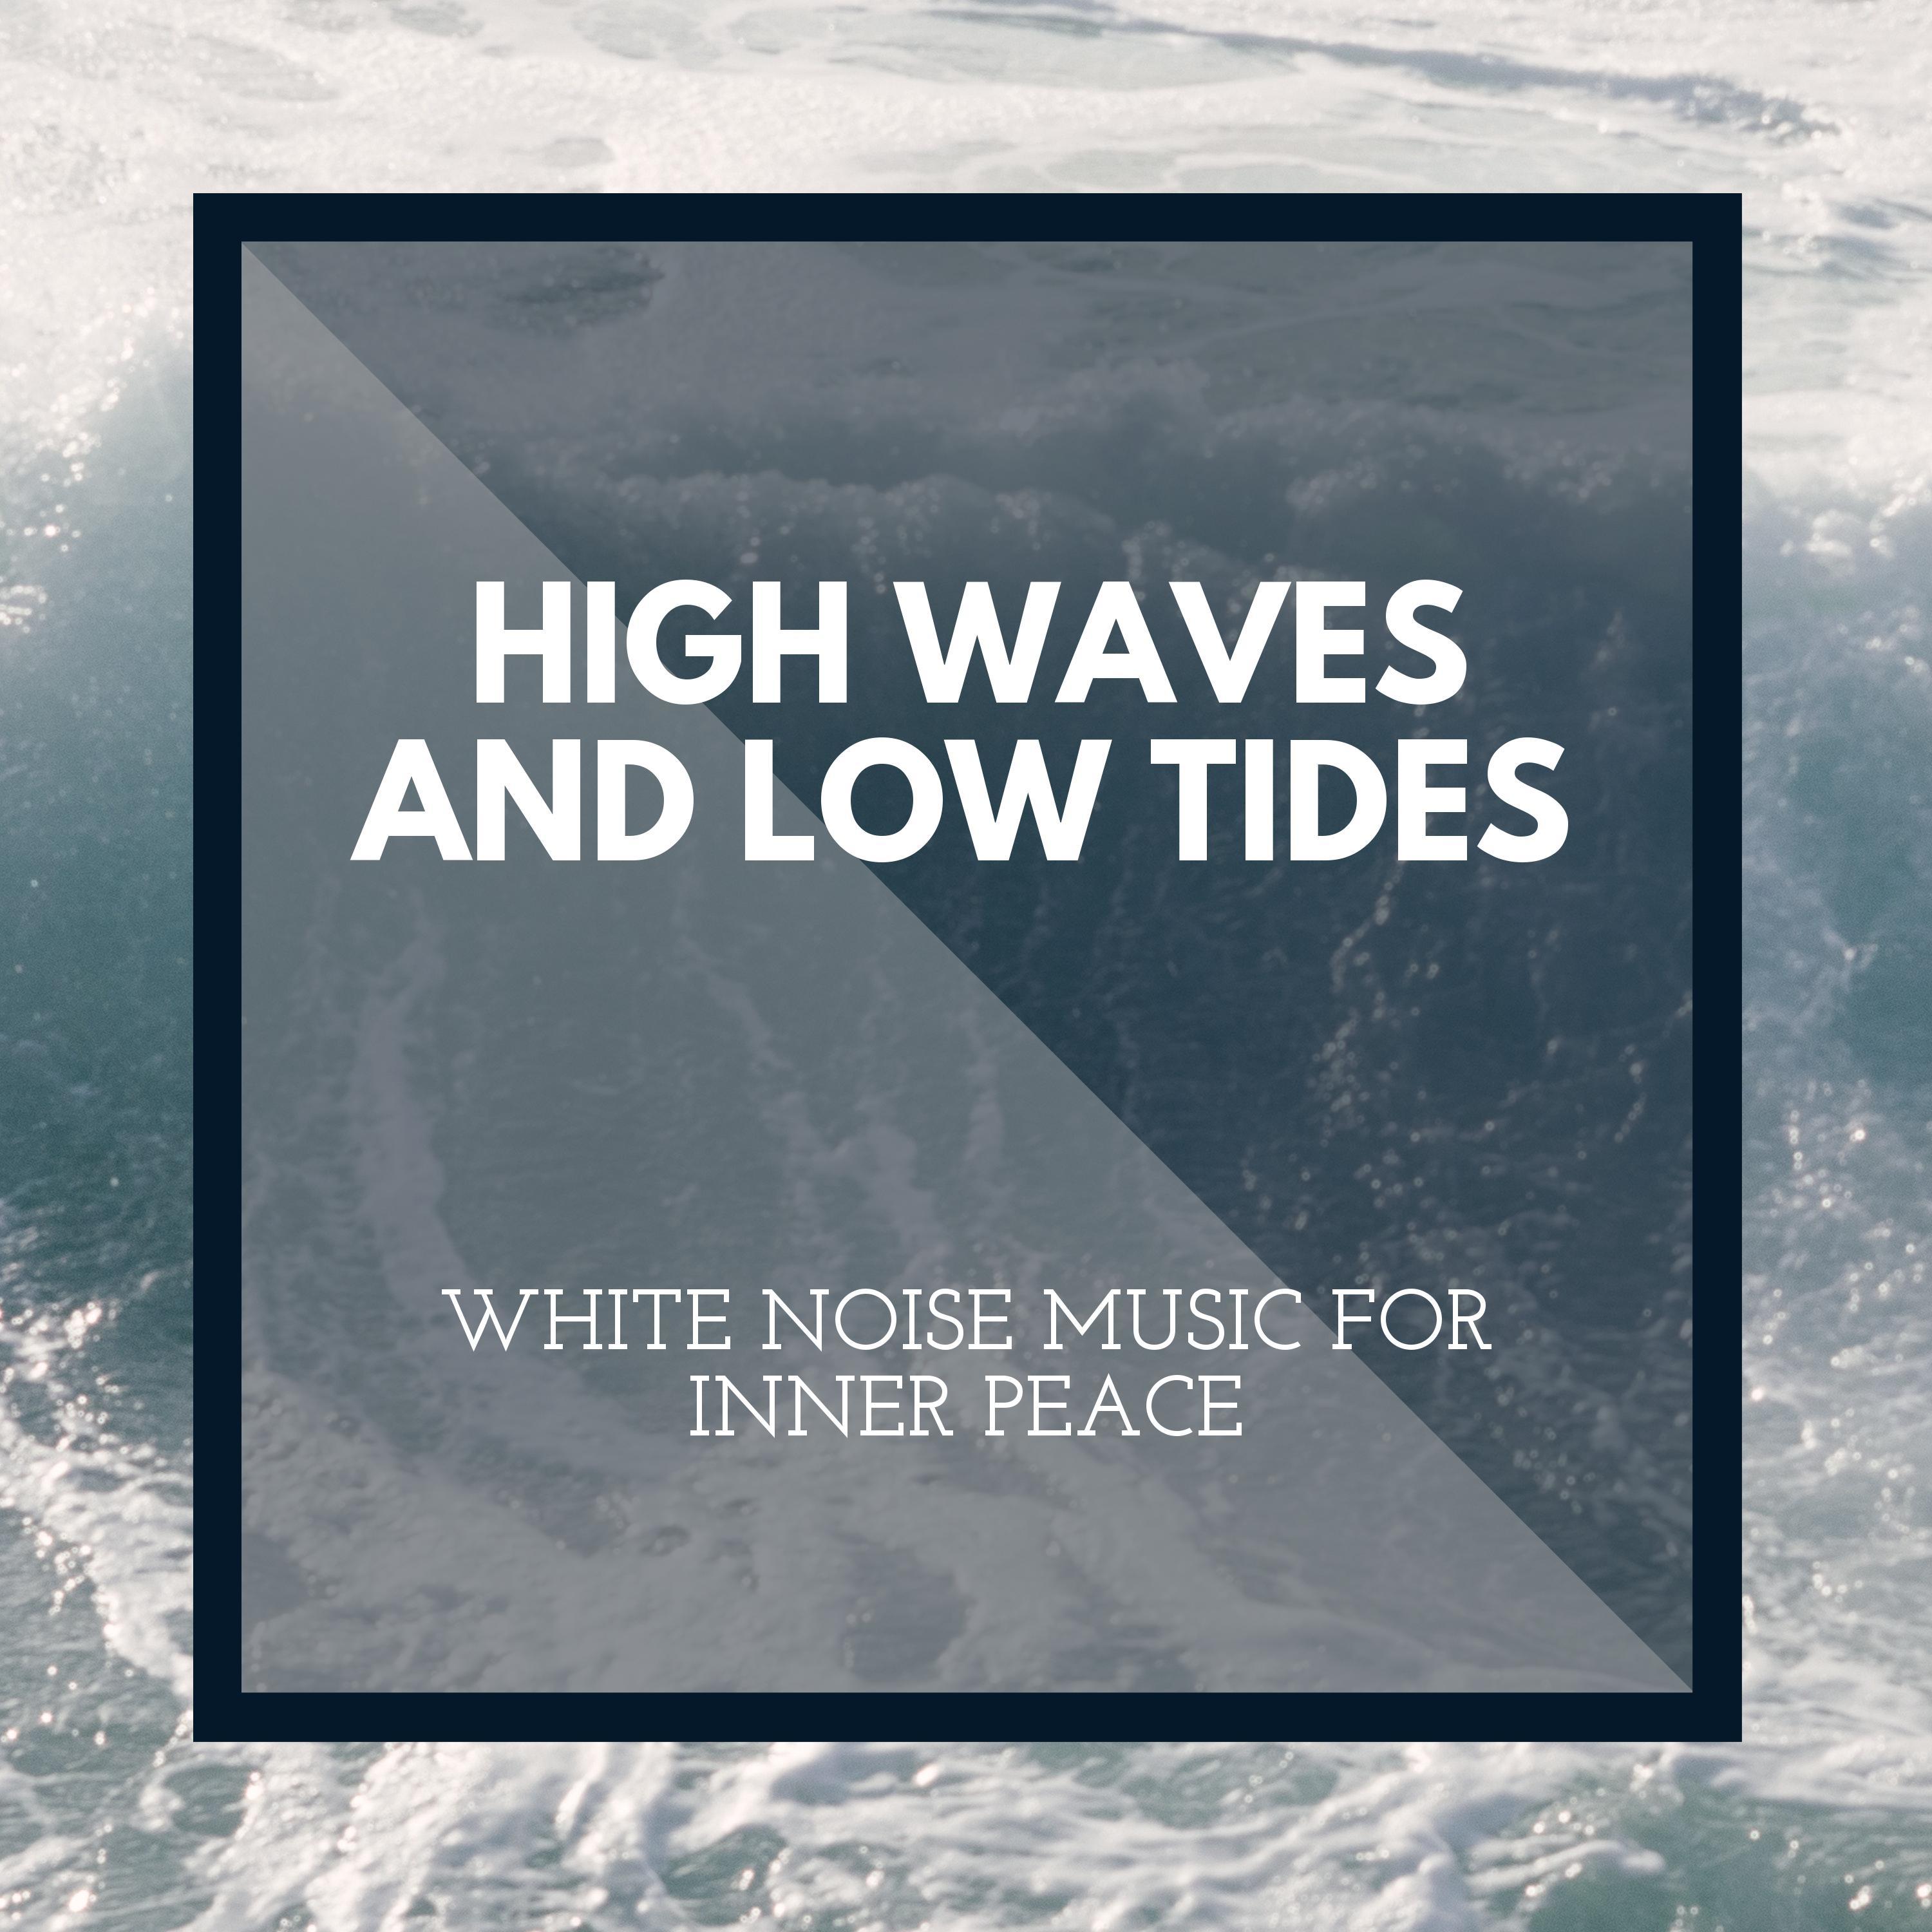 Soothing Nature Sounds Project - Advising Ocean Waves